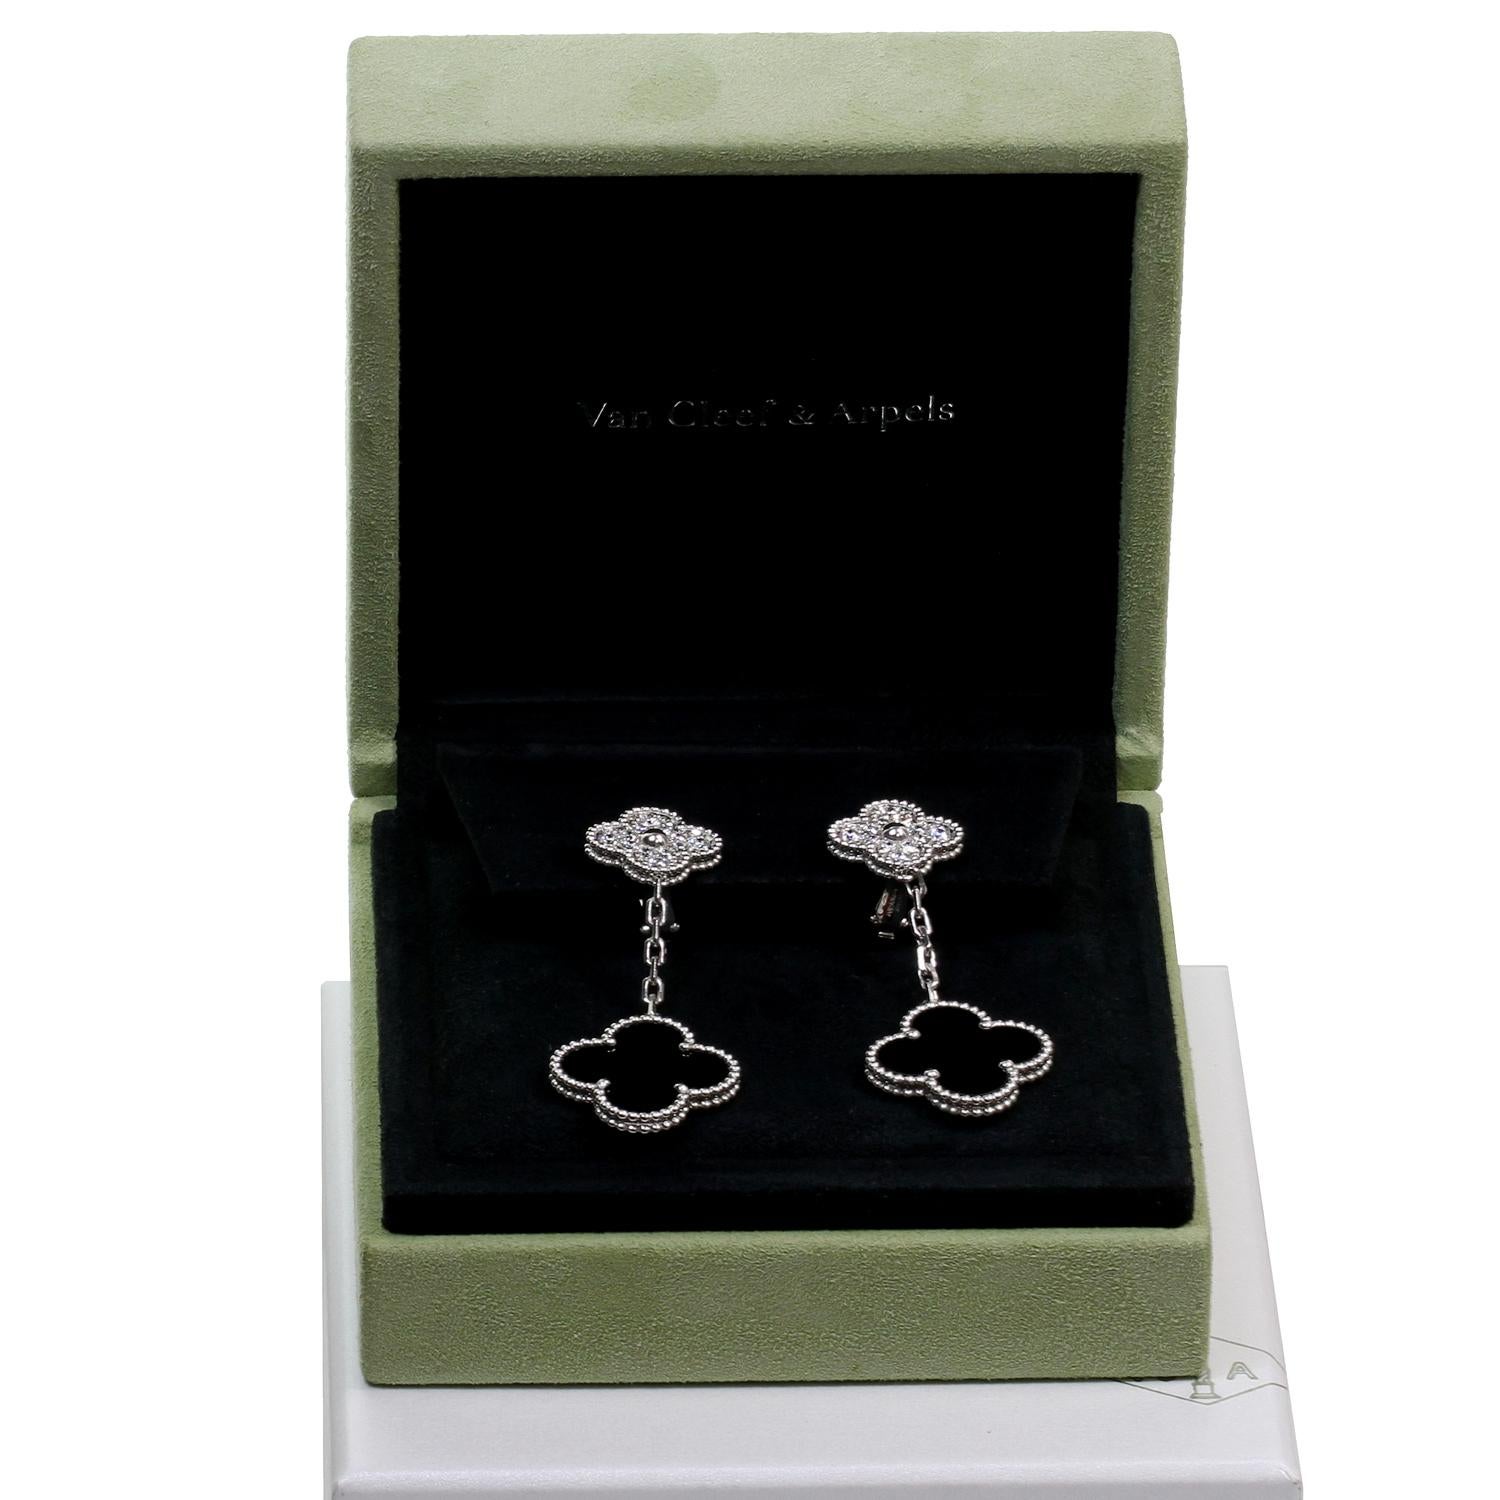 These fabulous dangling Van Cleef & Arpels earrings from the classic Alhambra collection each features 2 lucky clover motifs crafted in 18k white gold and set with black onyx and with round brilliant D-E-F VVS1-VVS2 diamonds weighing an estimated